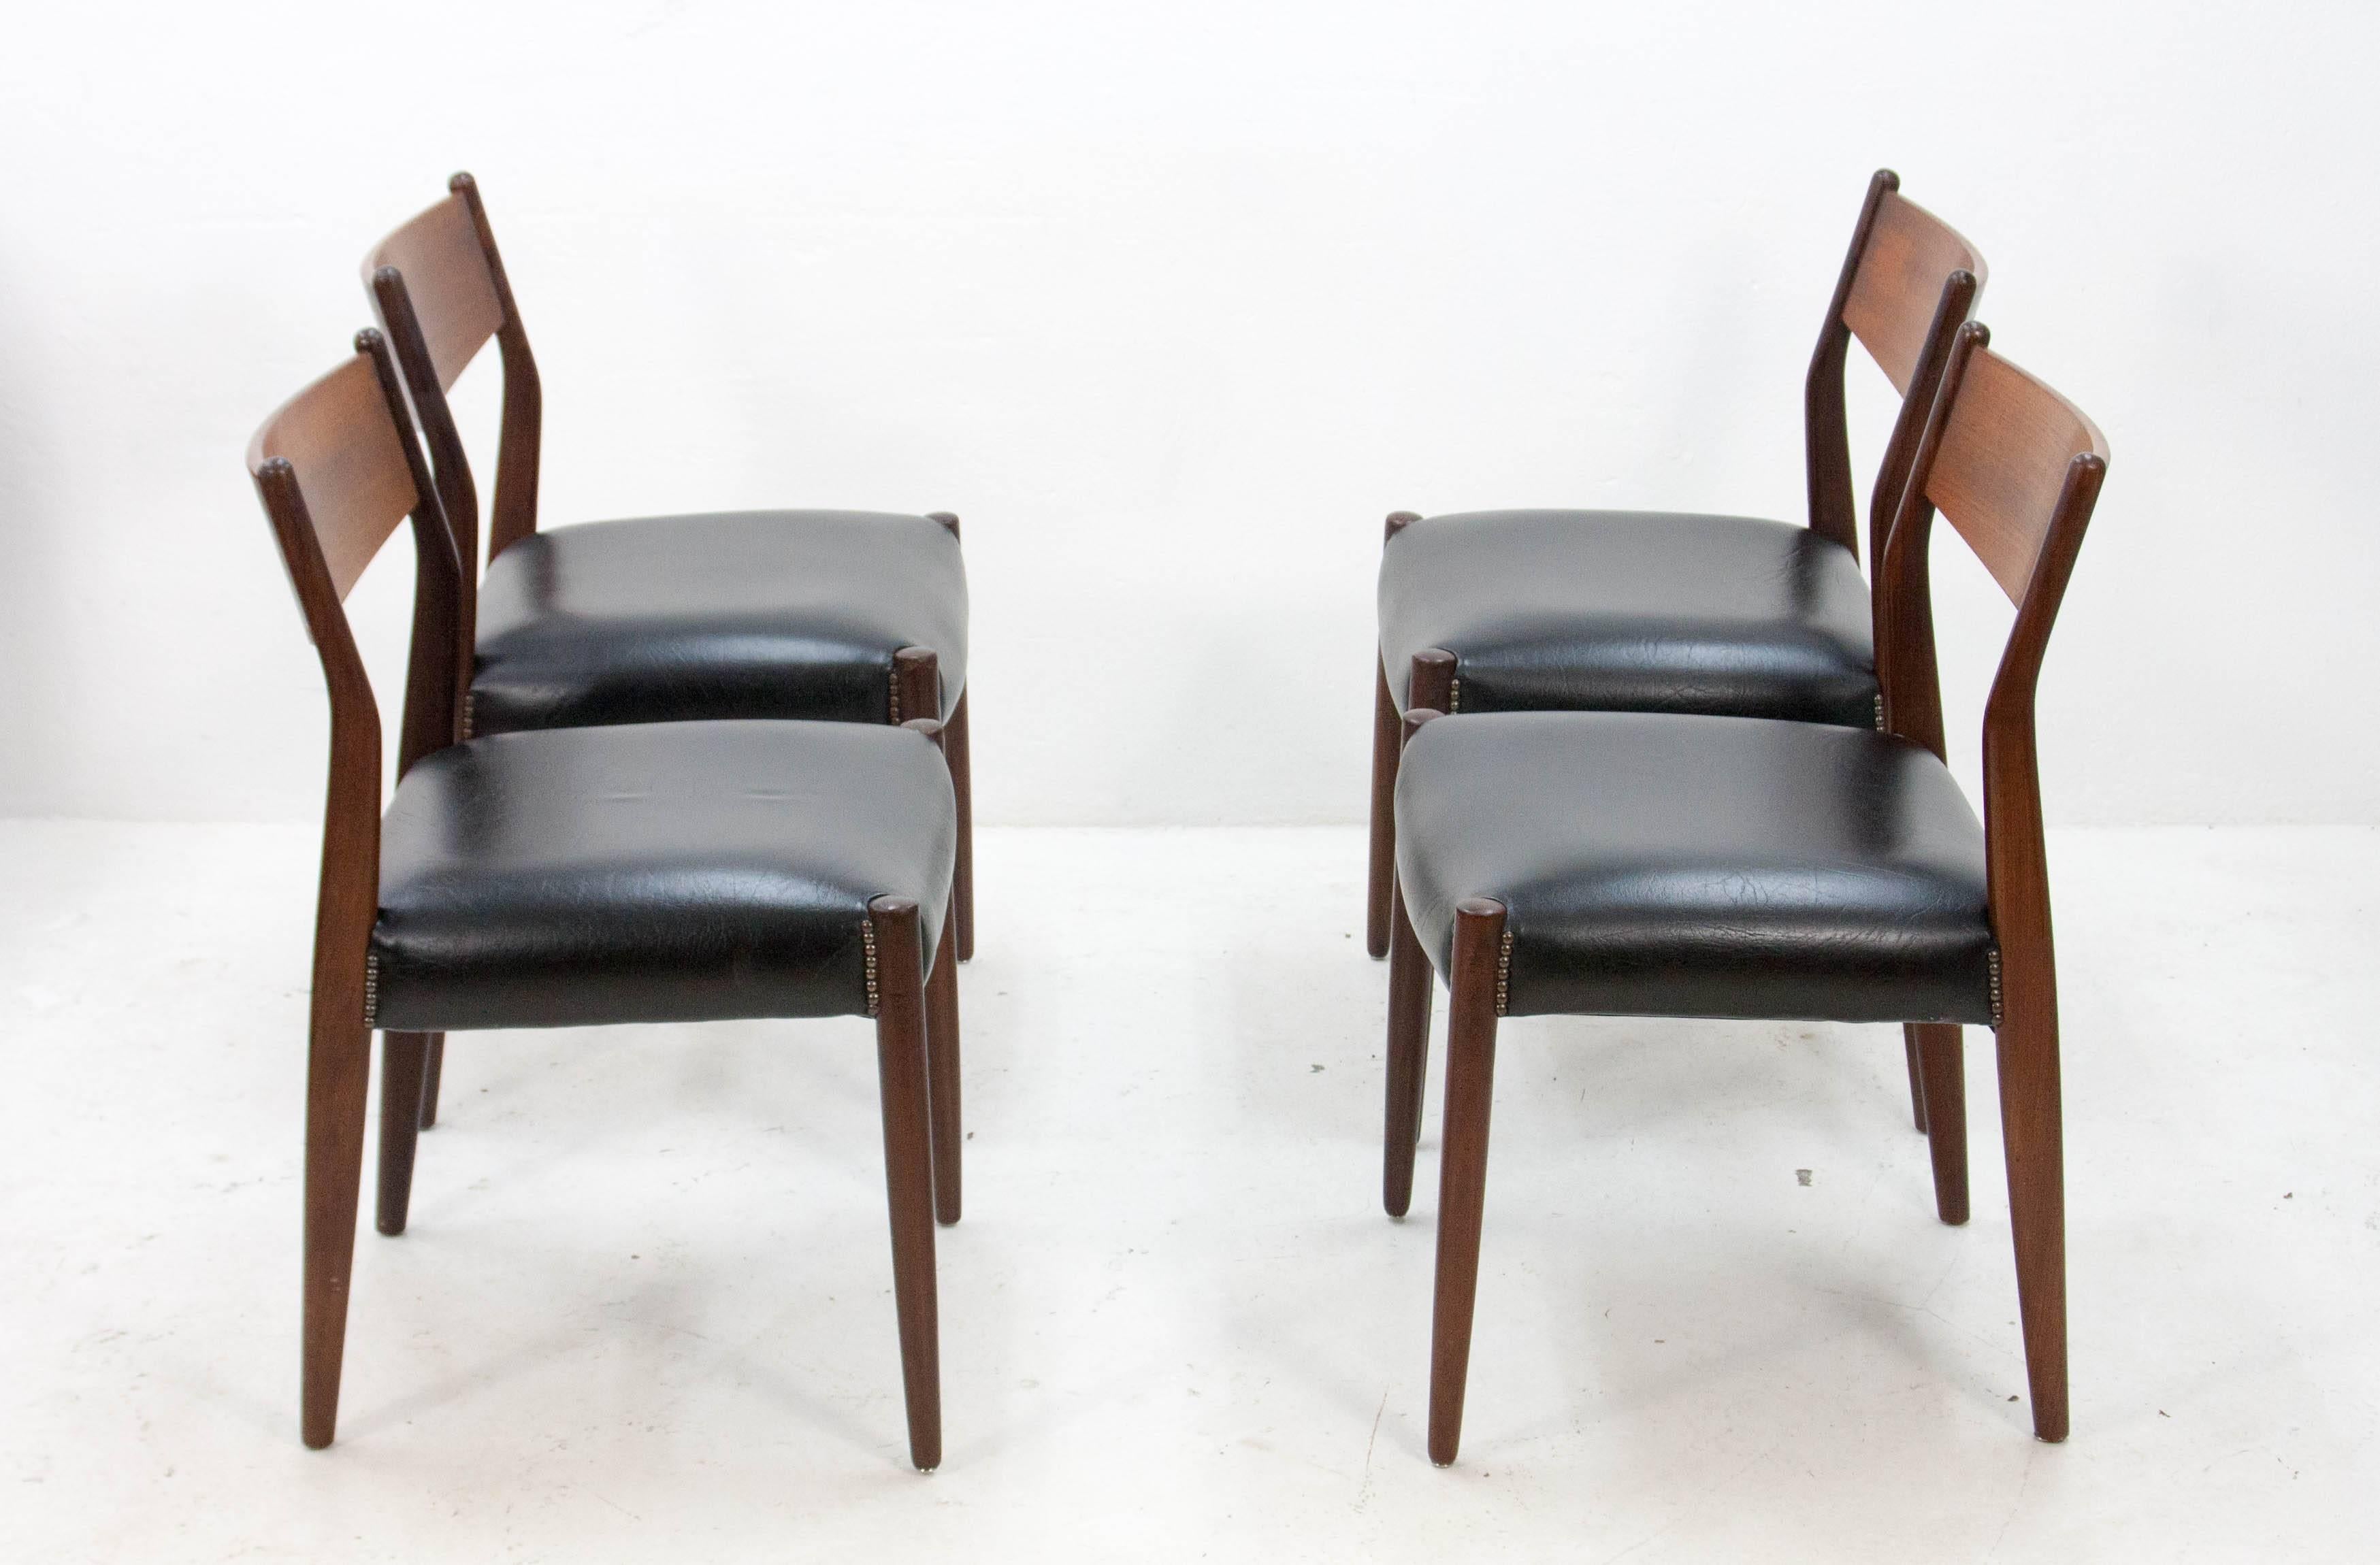 Four stylish Fritho Franeker dining chairs  Teak frame and faux leather upholstery. We have four in very good condition 